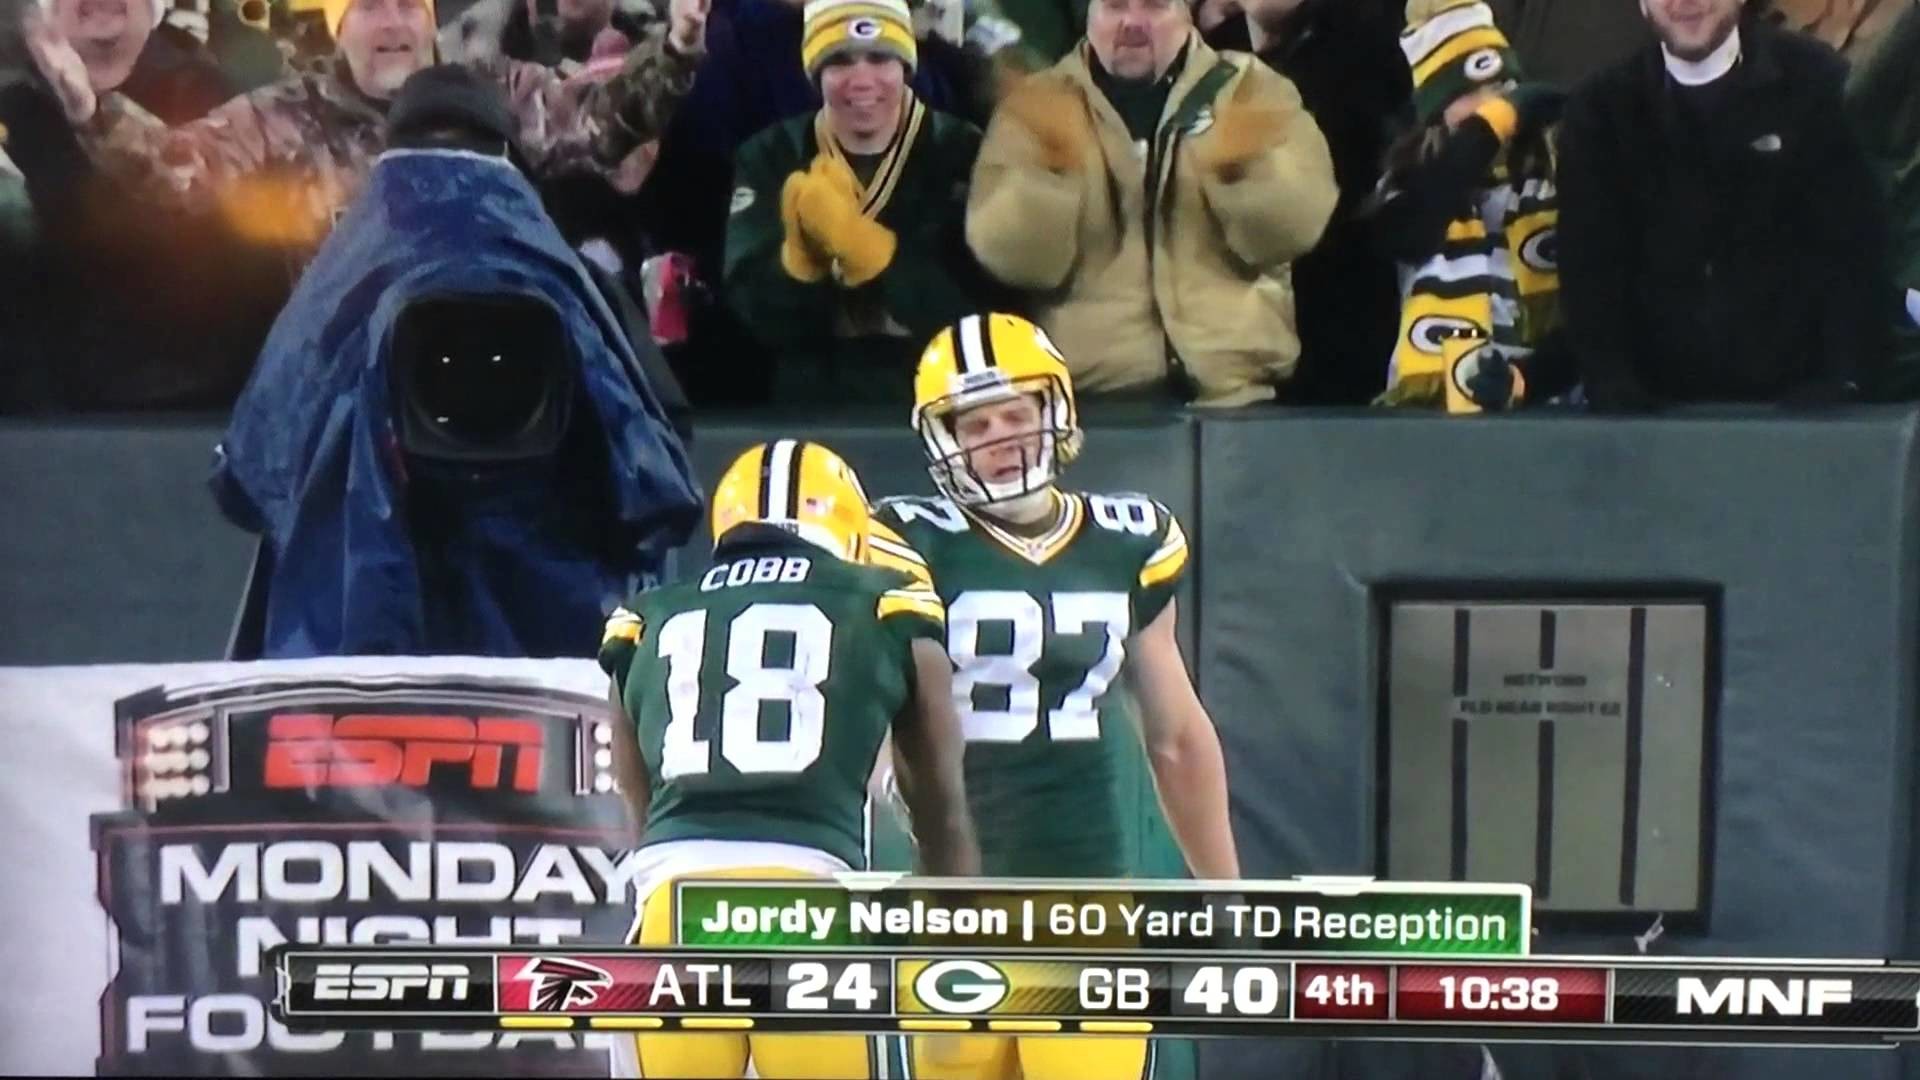 1920x1080 Aaron Rodgers to Jordy Nelson for 65 yard touchdown. 12-08-14